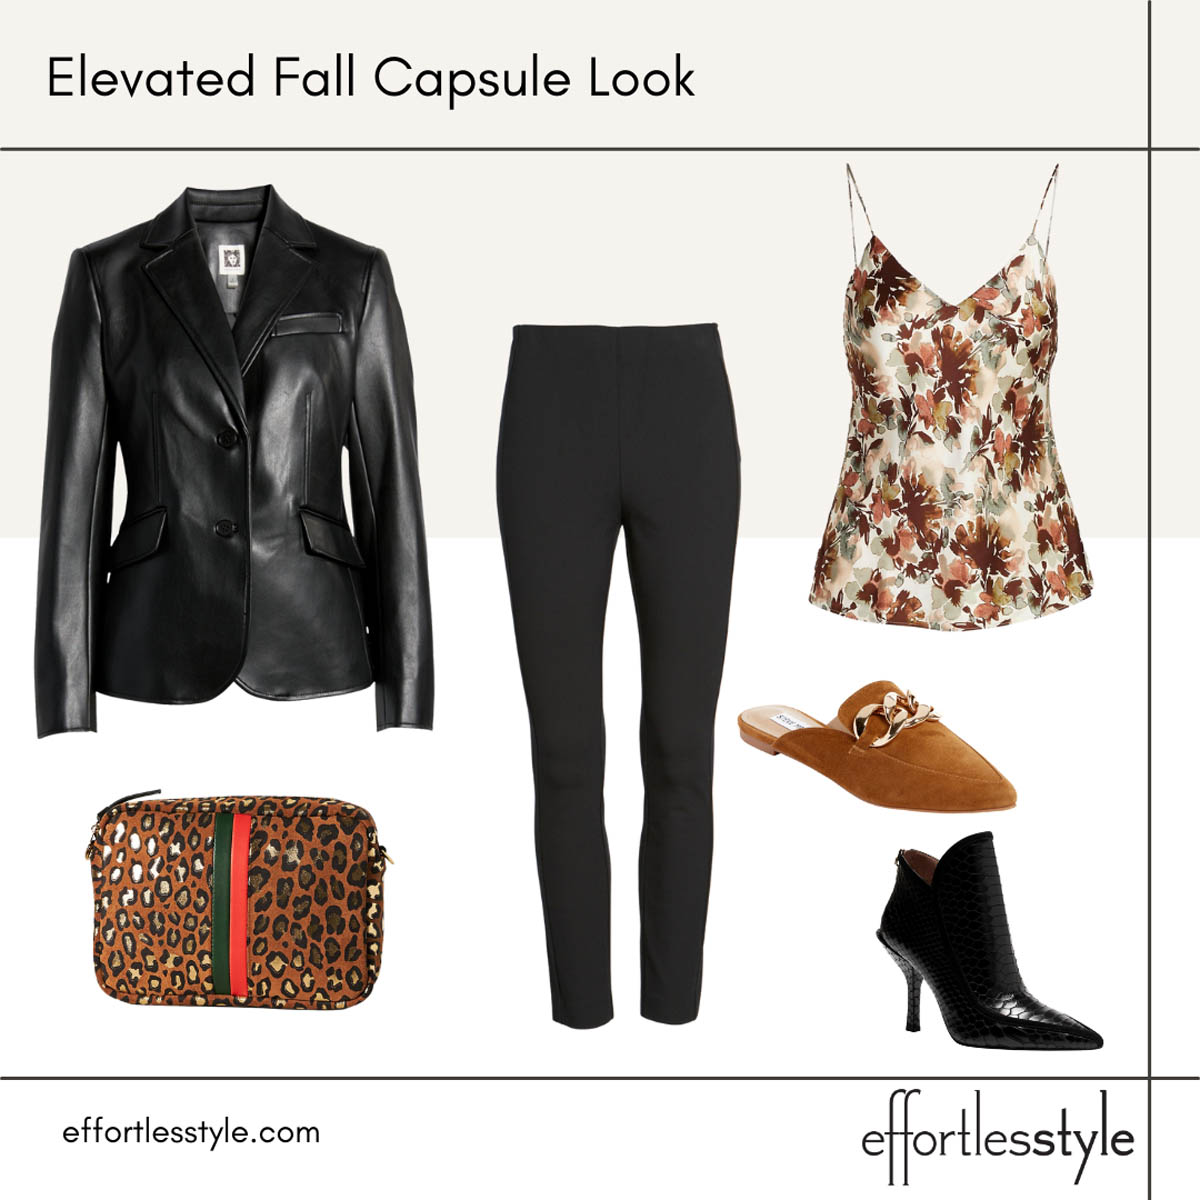 Black Leather Blazer & Ankle Pants Outfit What to Wear to the Office